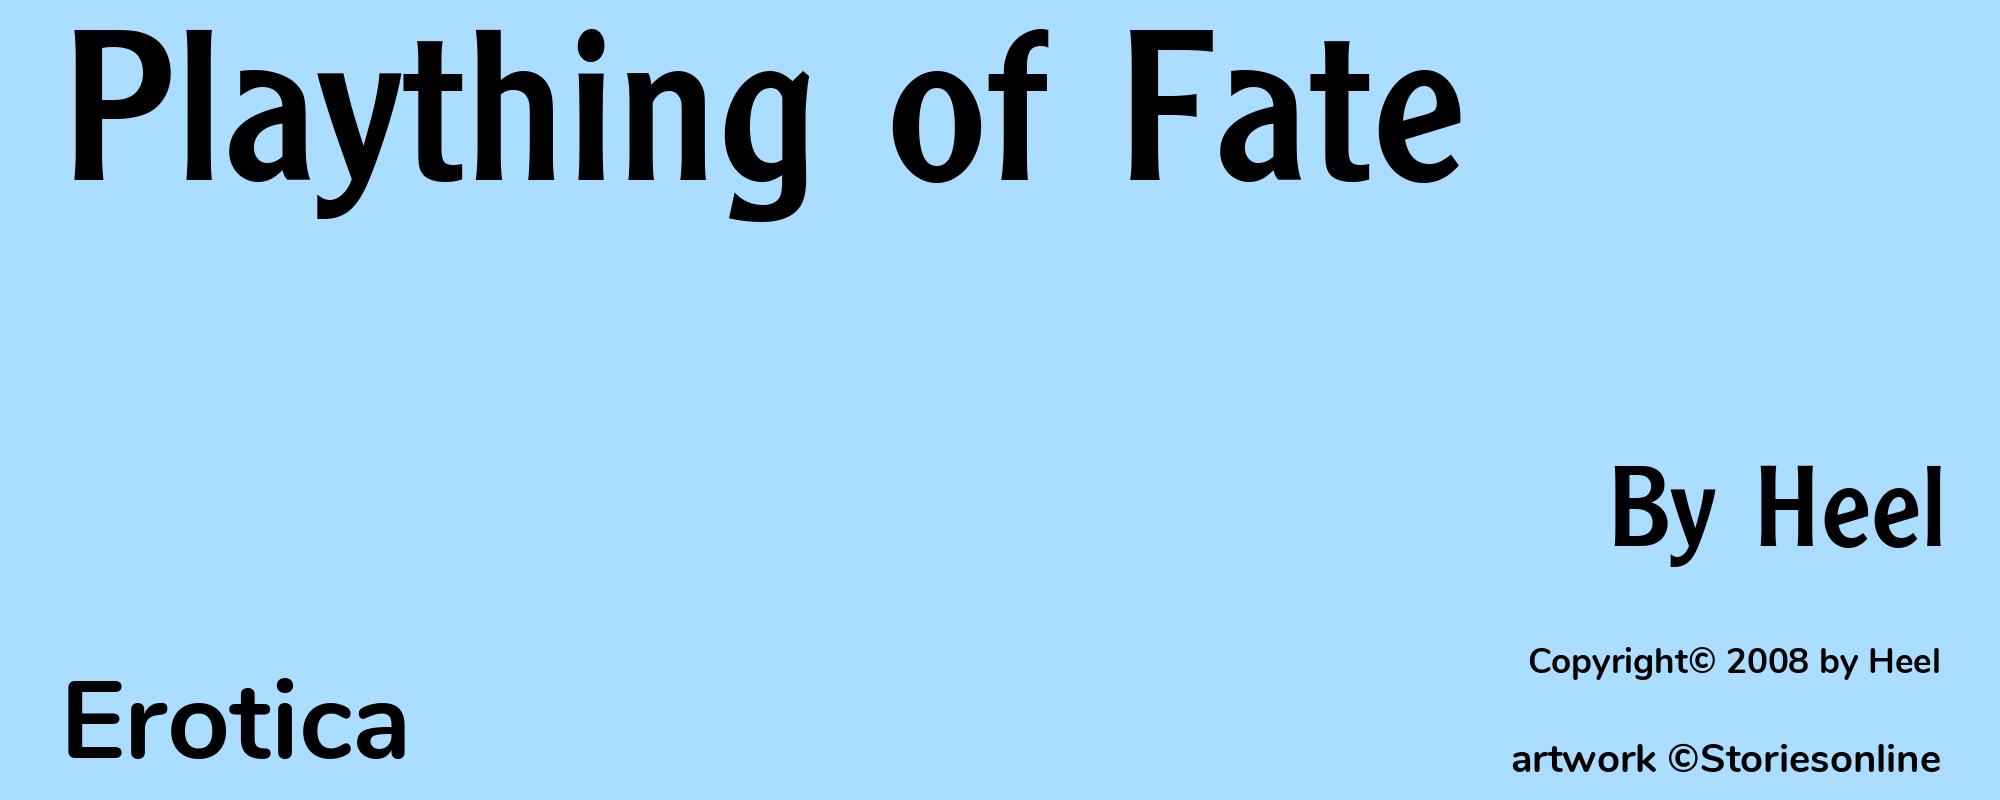 Plaything of Fate - Cover